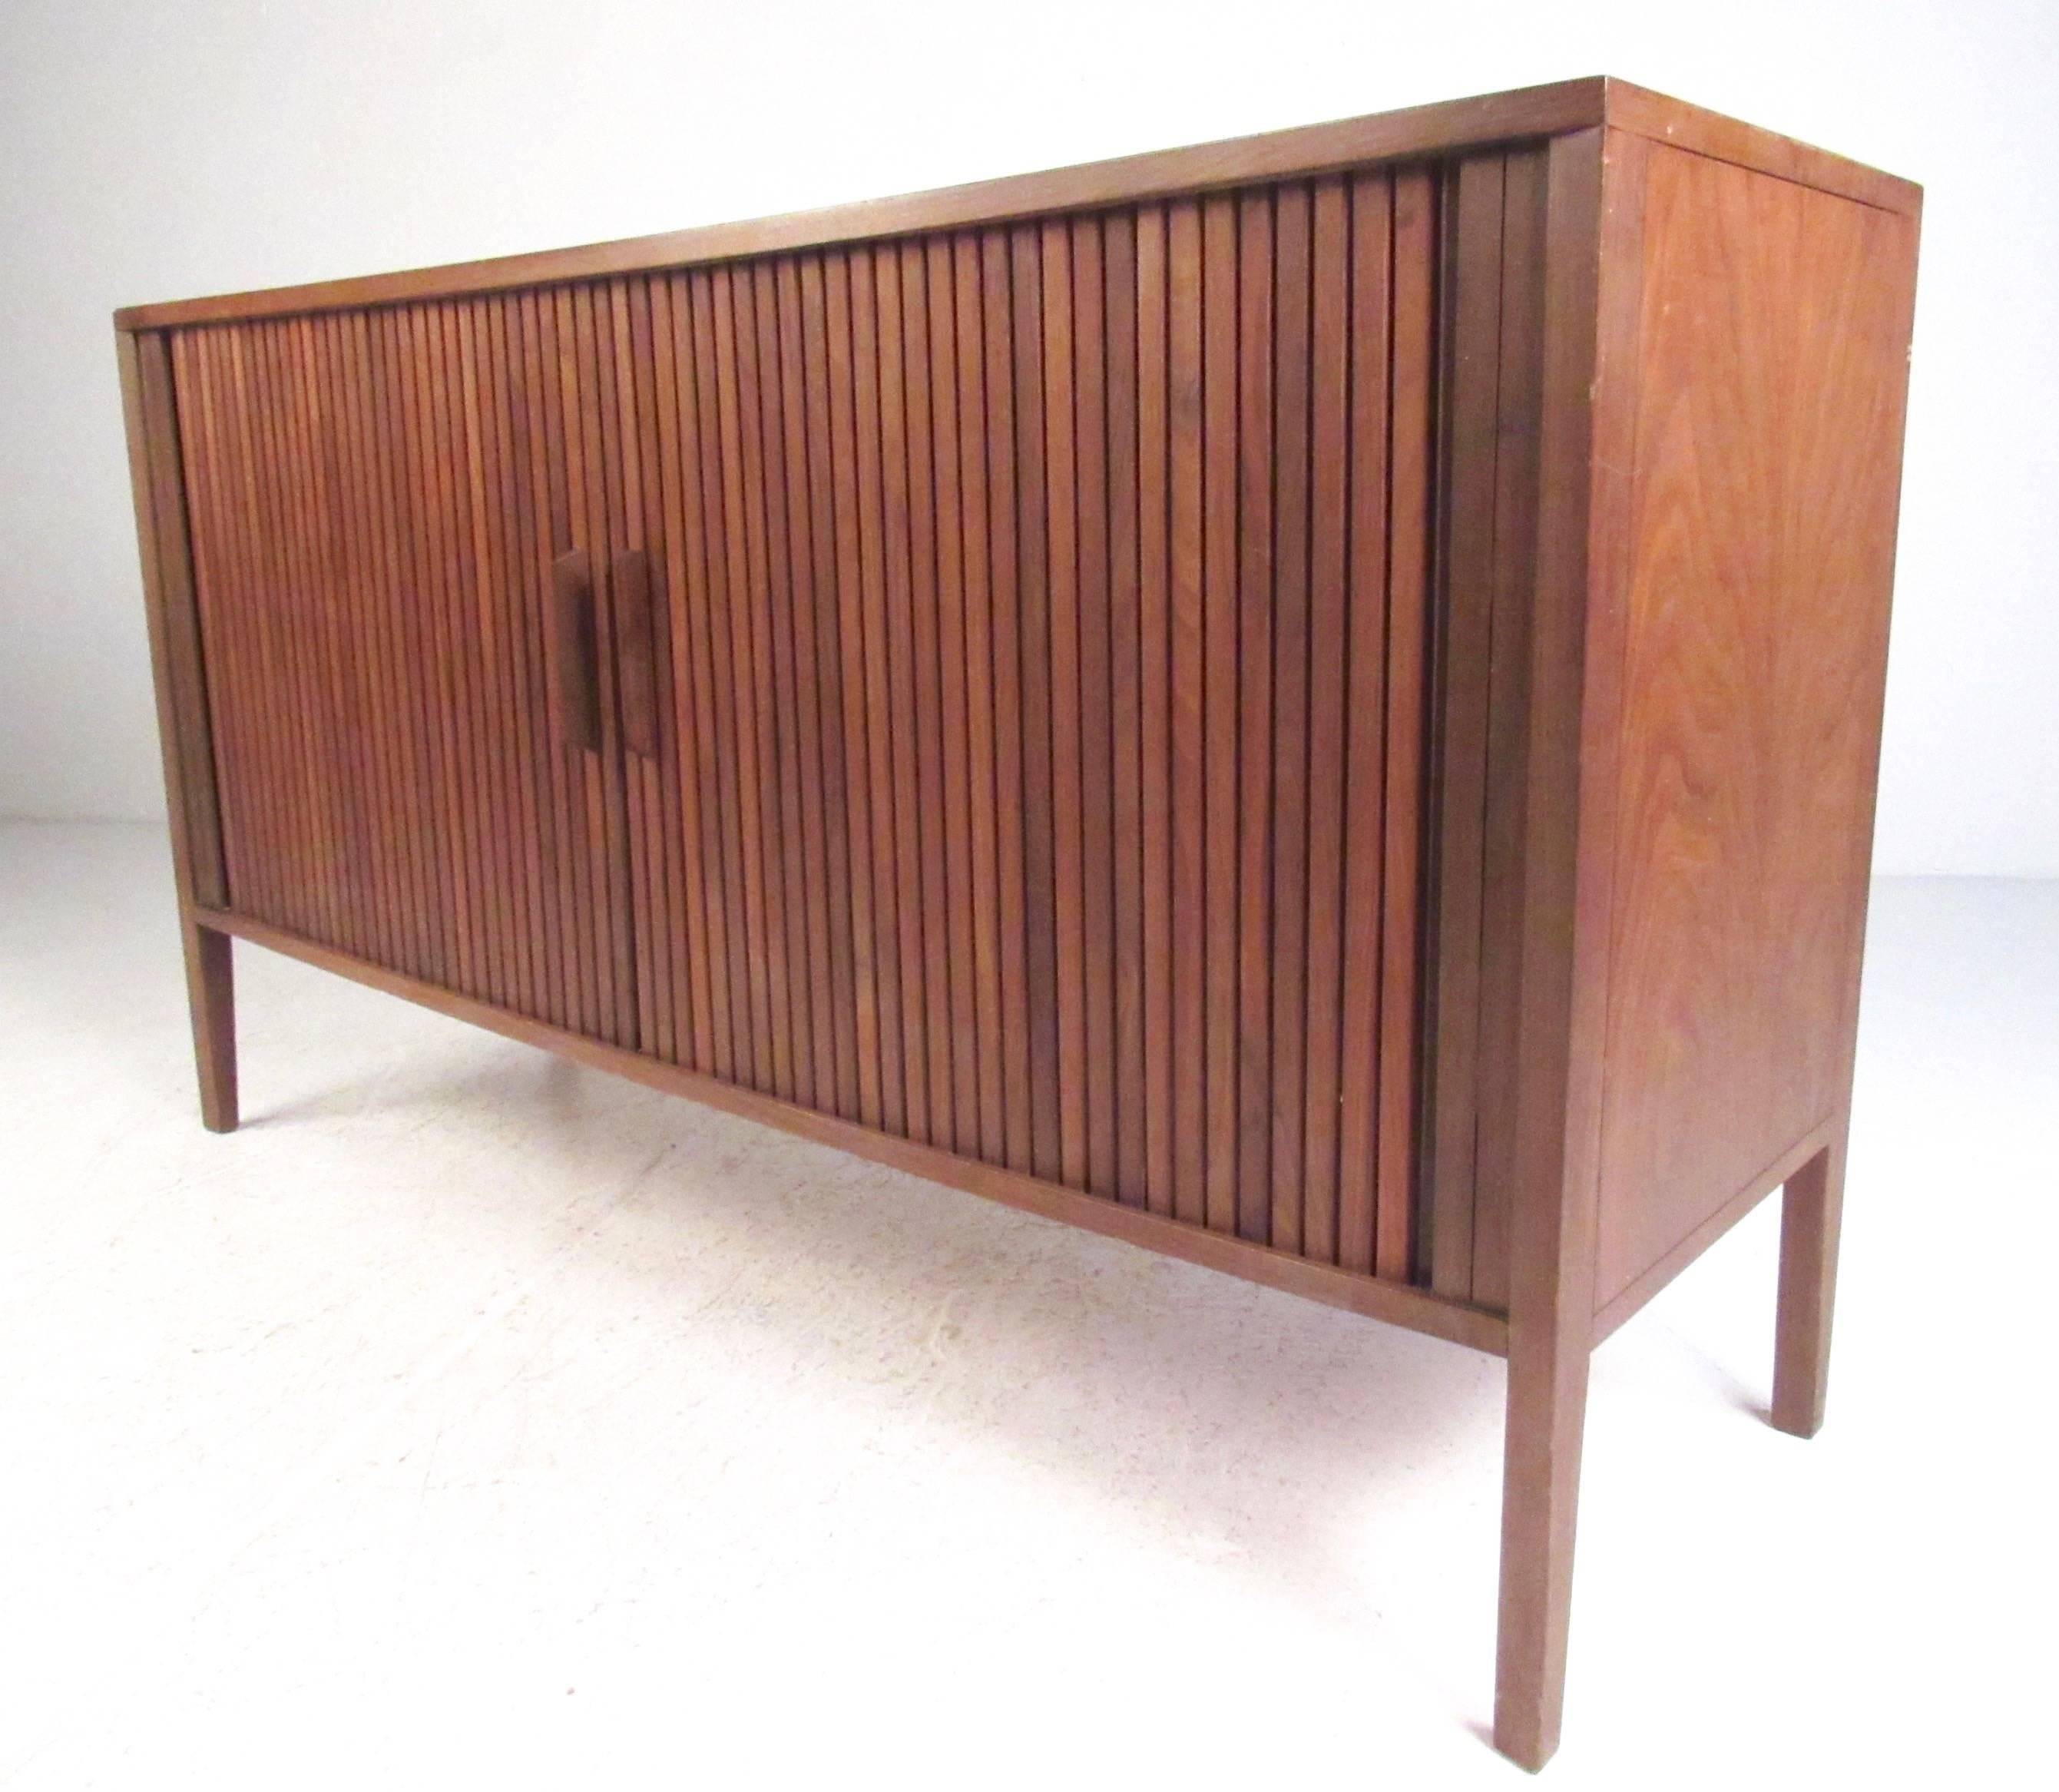 This stylish Mid-Century credenza makes a unique storage piece perfect for use as a television console, storage cabinet, or for occasional service. Walnut construction with tambour door and spacious shelf storage make this ideal for home or office.